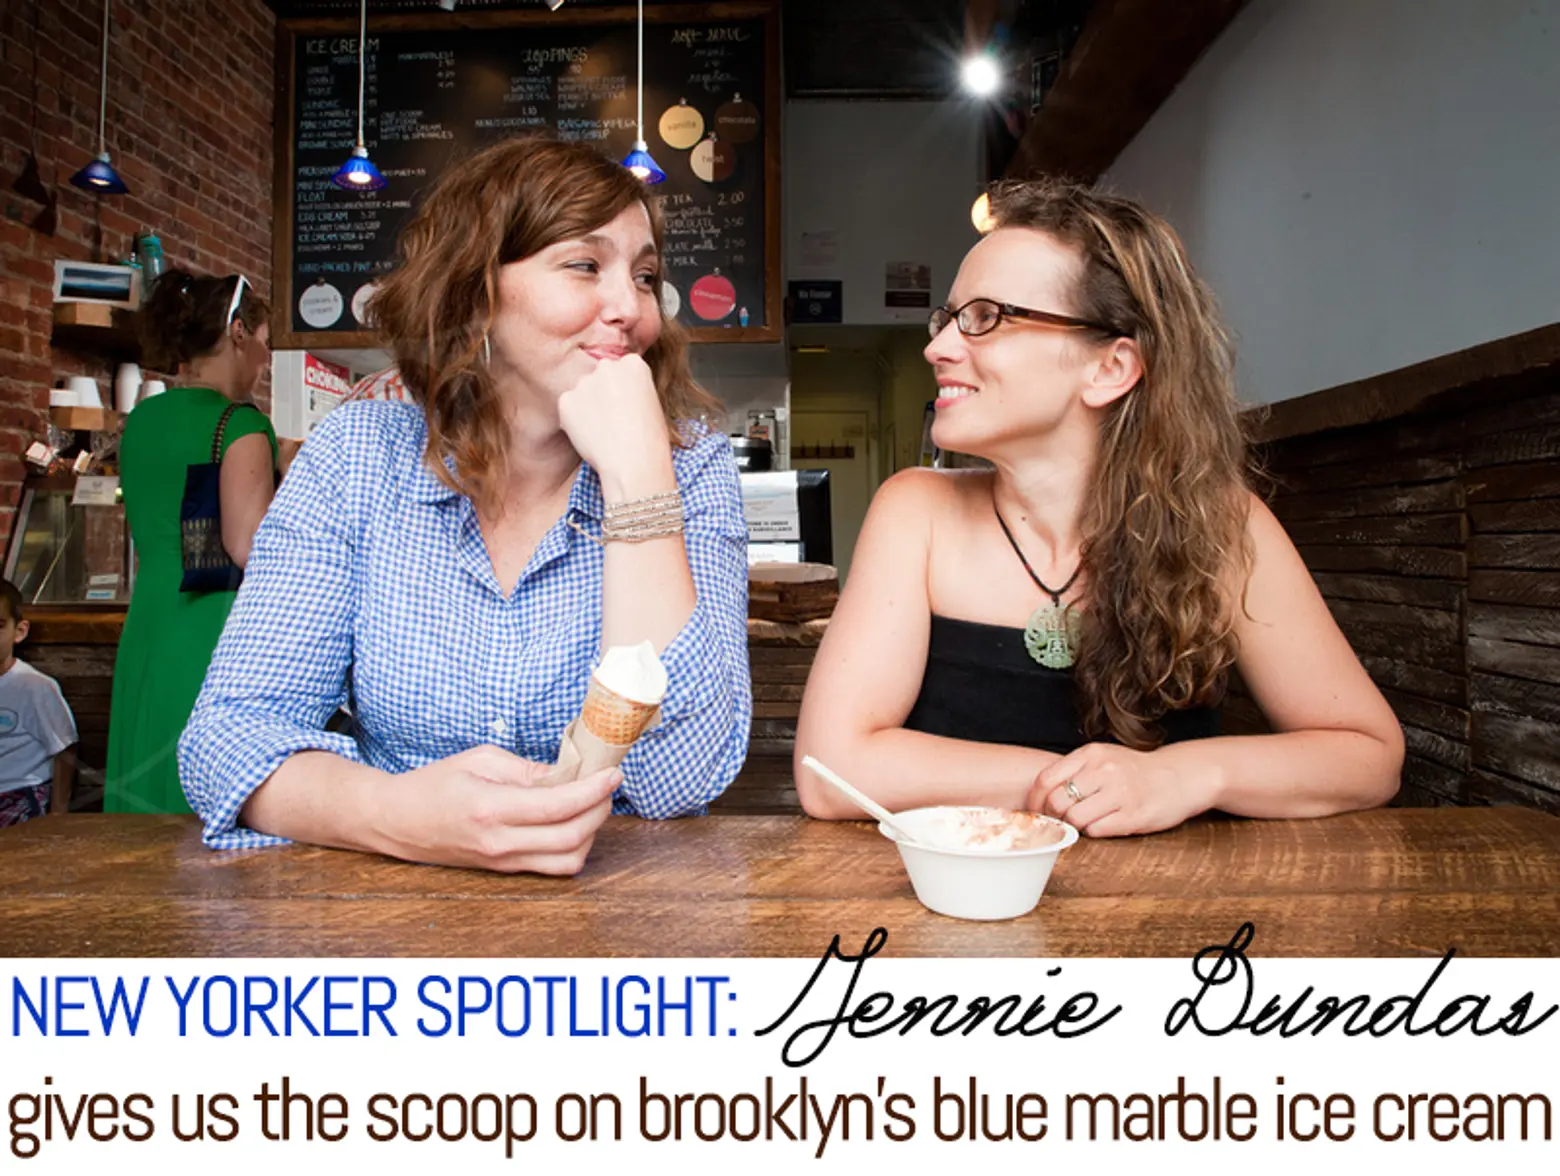 New Yorker Spotlight: Getting the Scoop with Jennie Dundas of Brooklyn’s Blue Marble Ice Cream